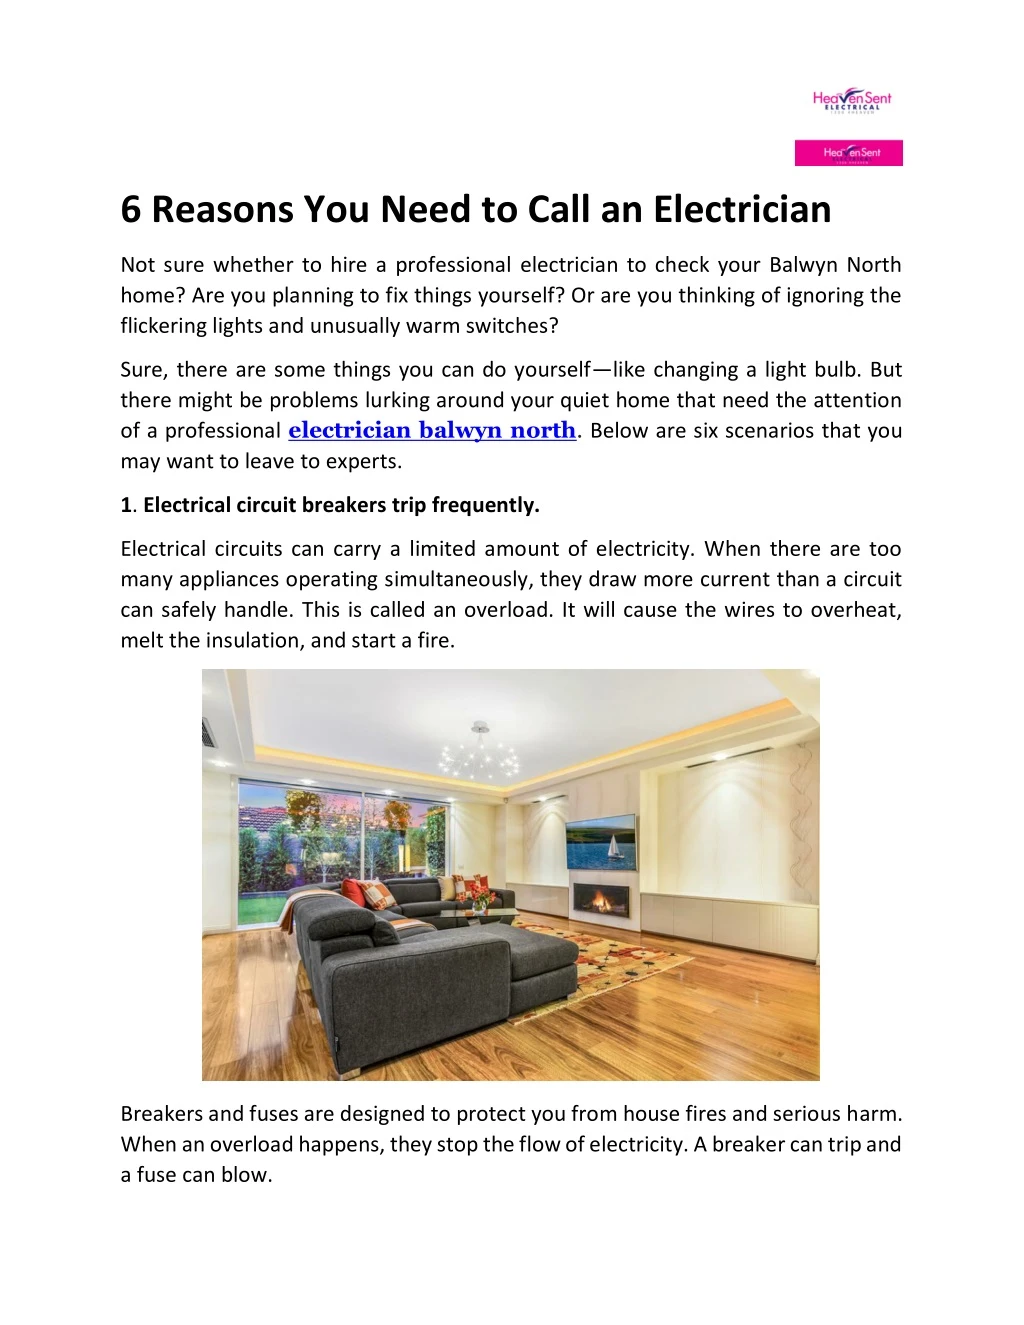 6 reasons you need to call an electrician